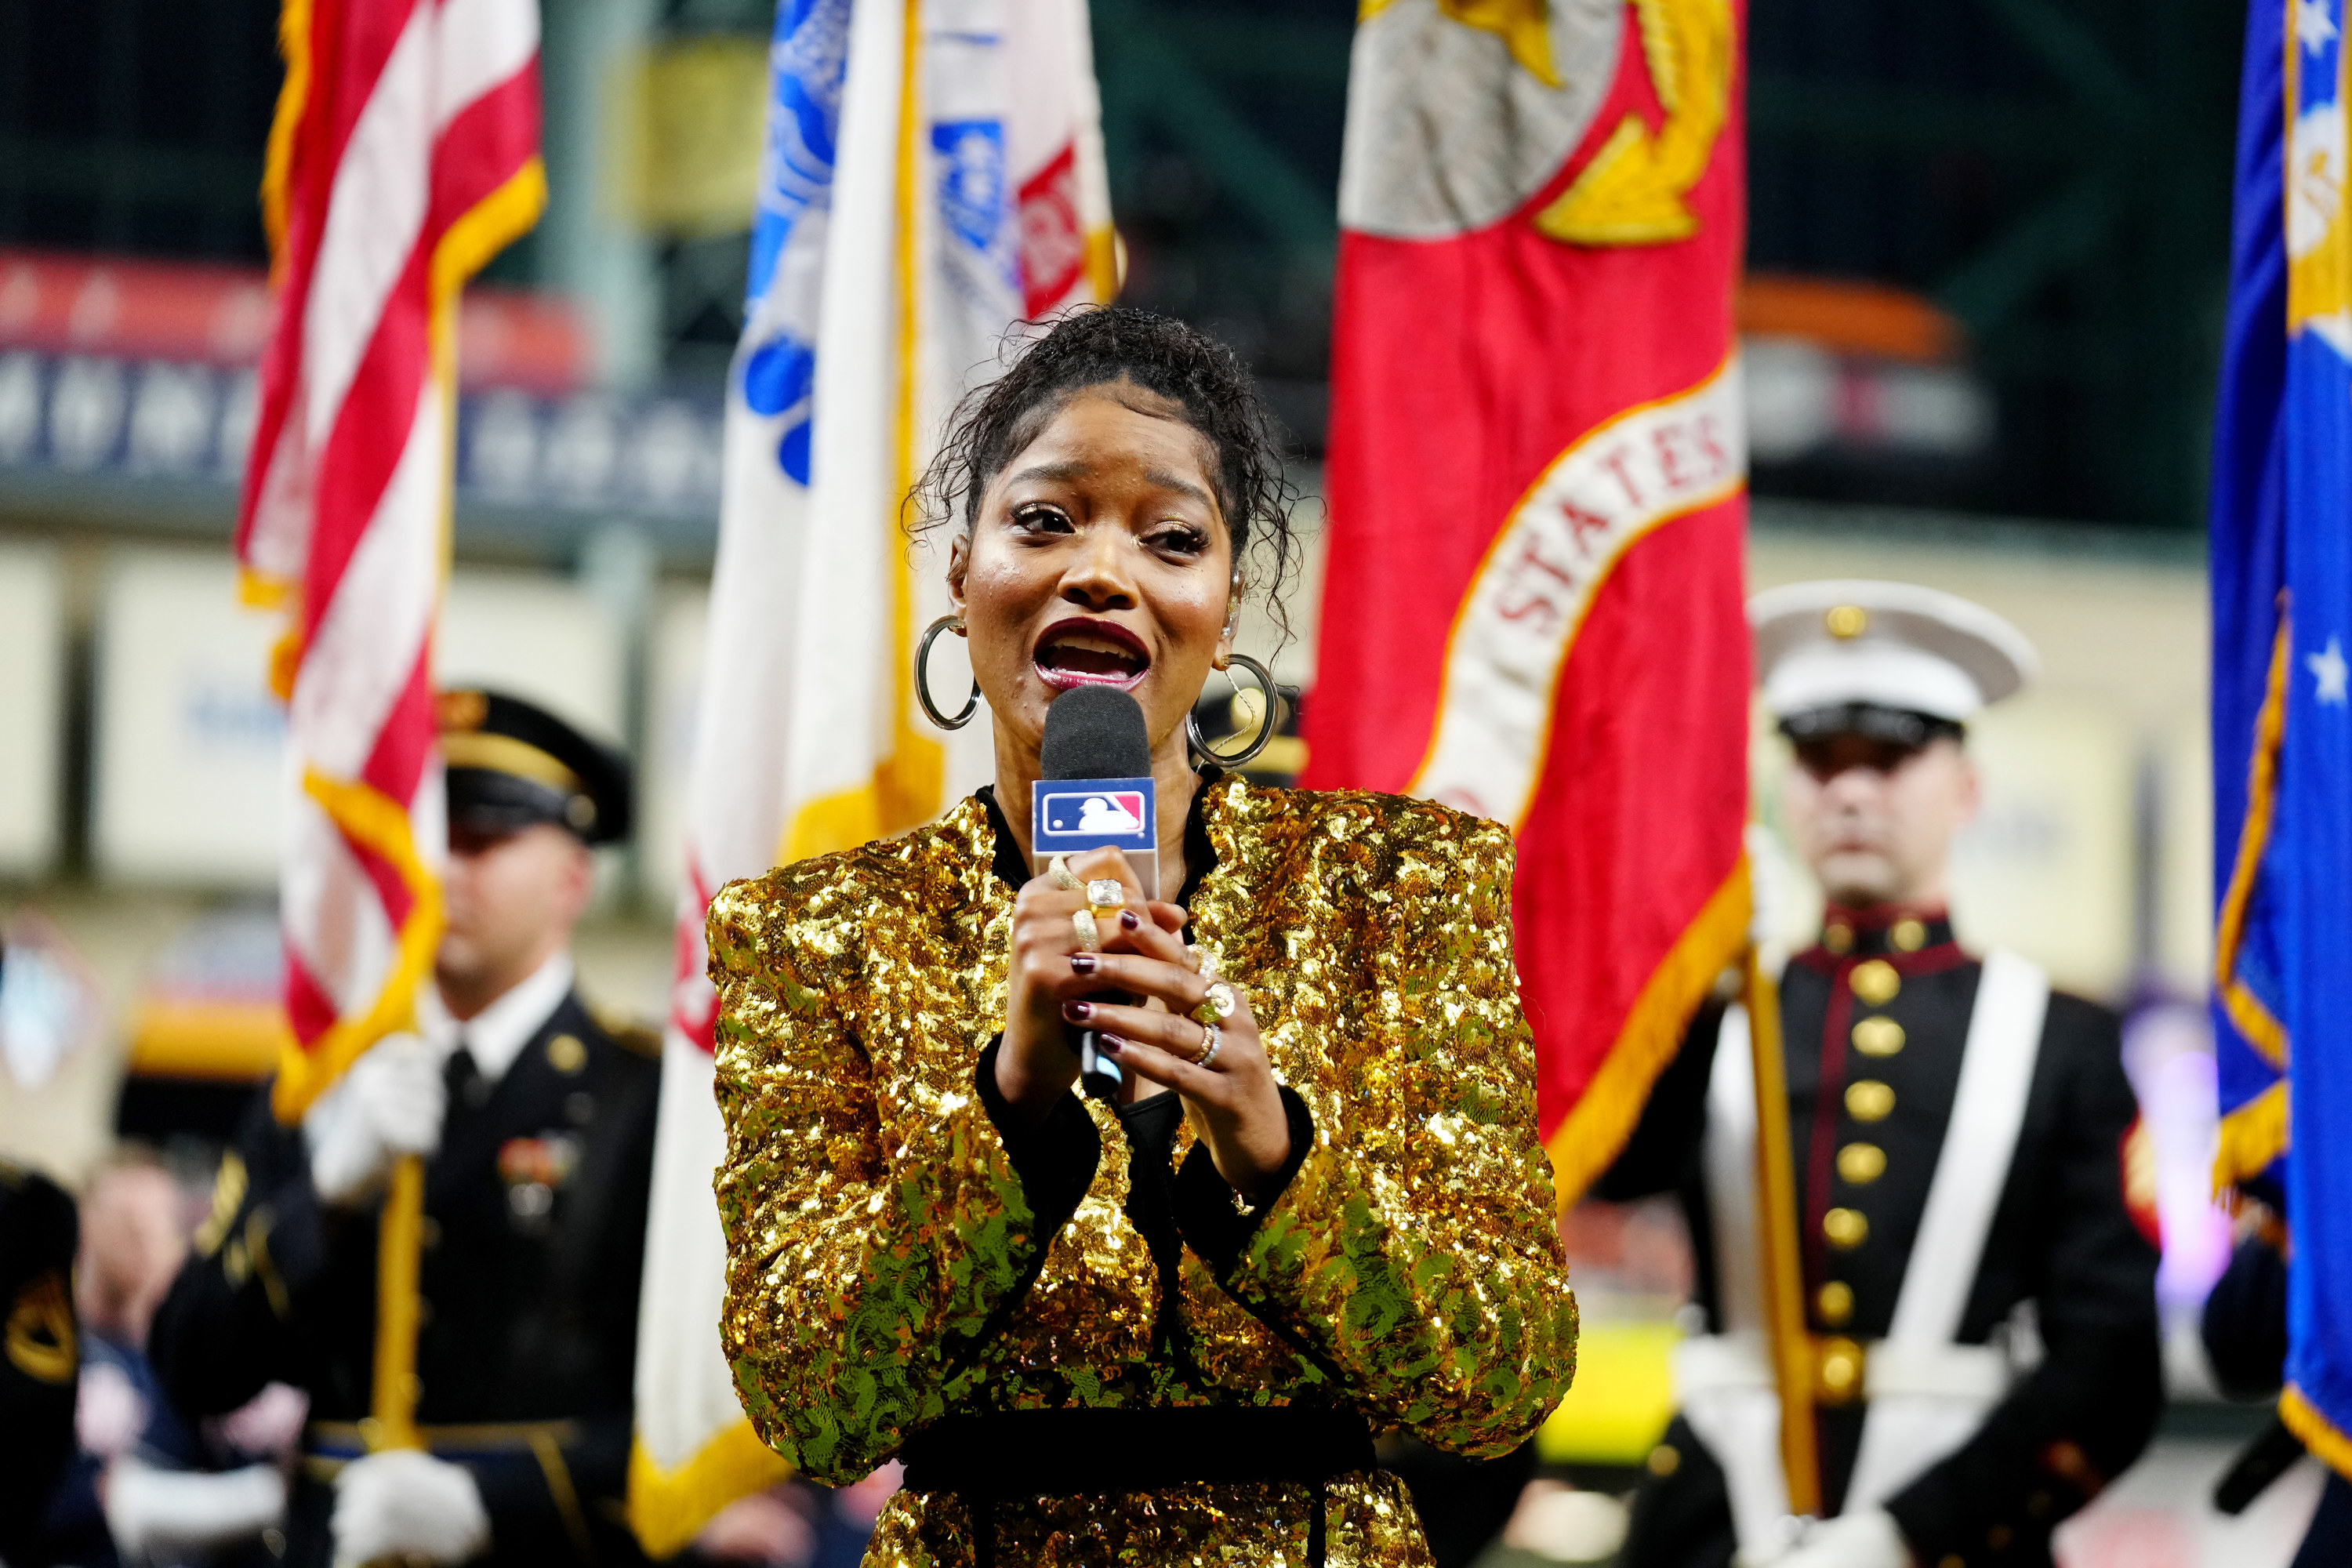 Keke at a microphone singing in front of members of the military in uniform holding flags